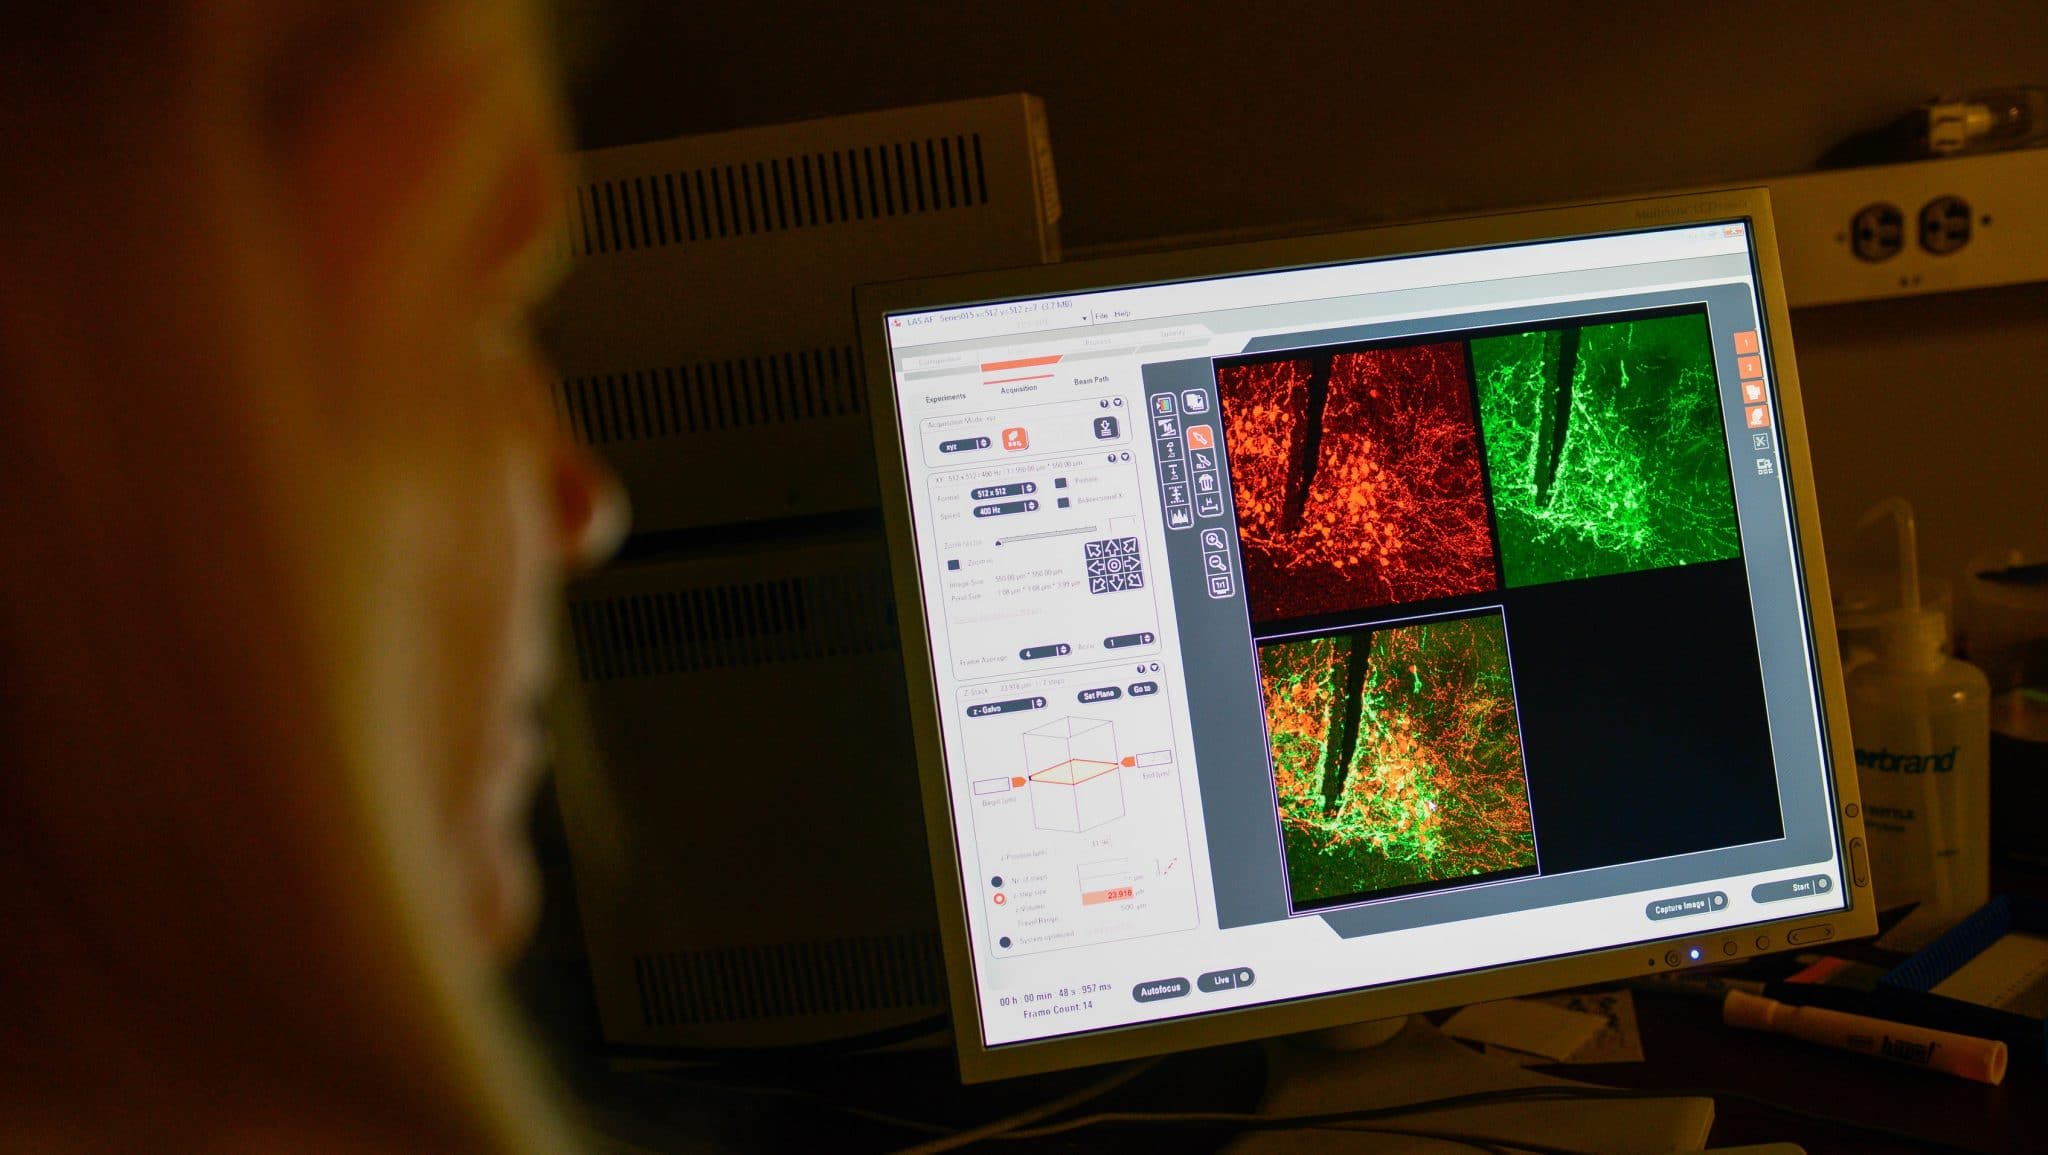 Heather Patisaul studies how chemicals in the environment affect us. In this image, she’s examining neurons in the brain of a laboratory rat colored by a process called immunohistochemistry.